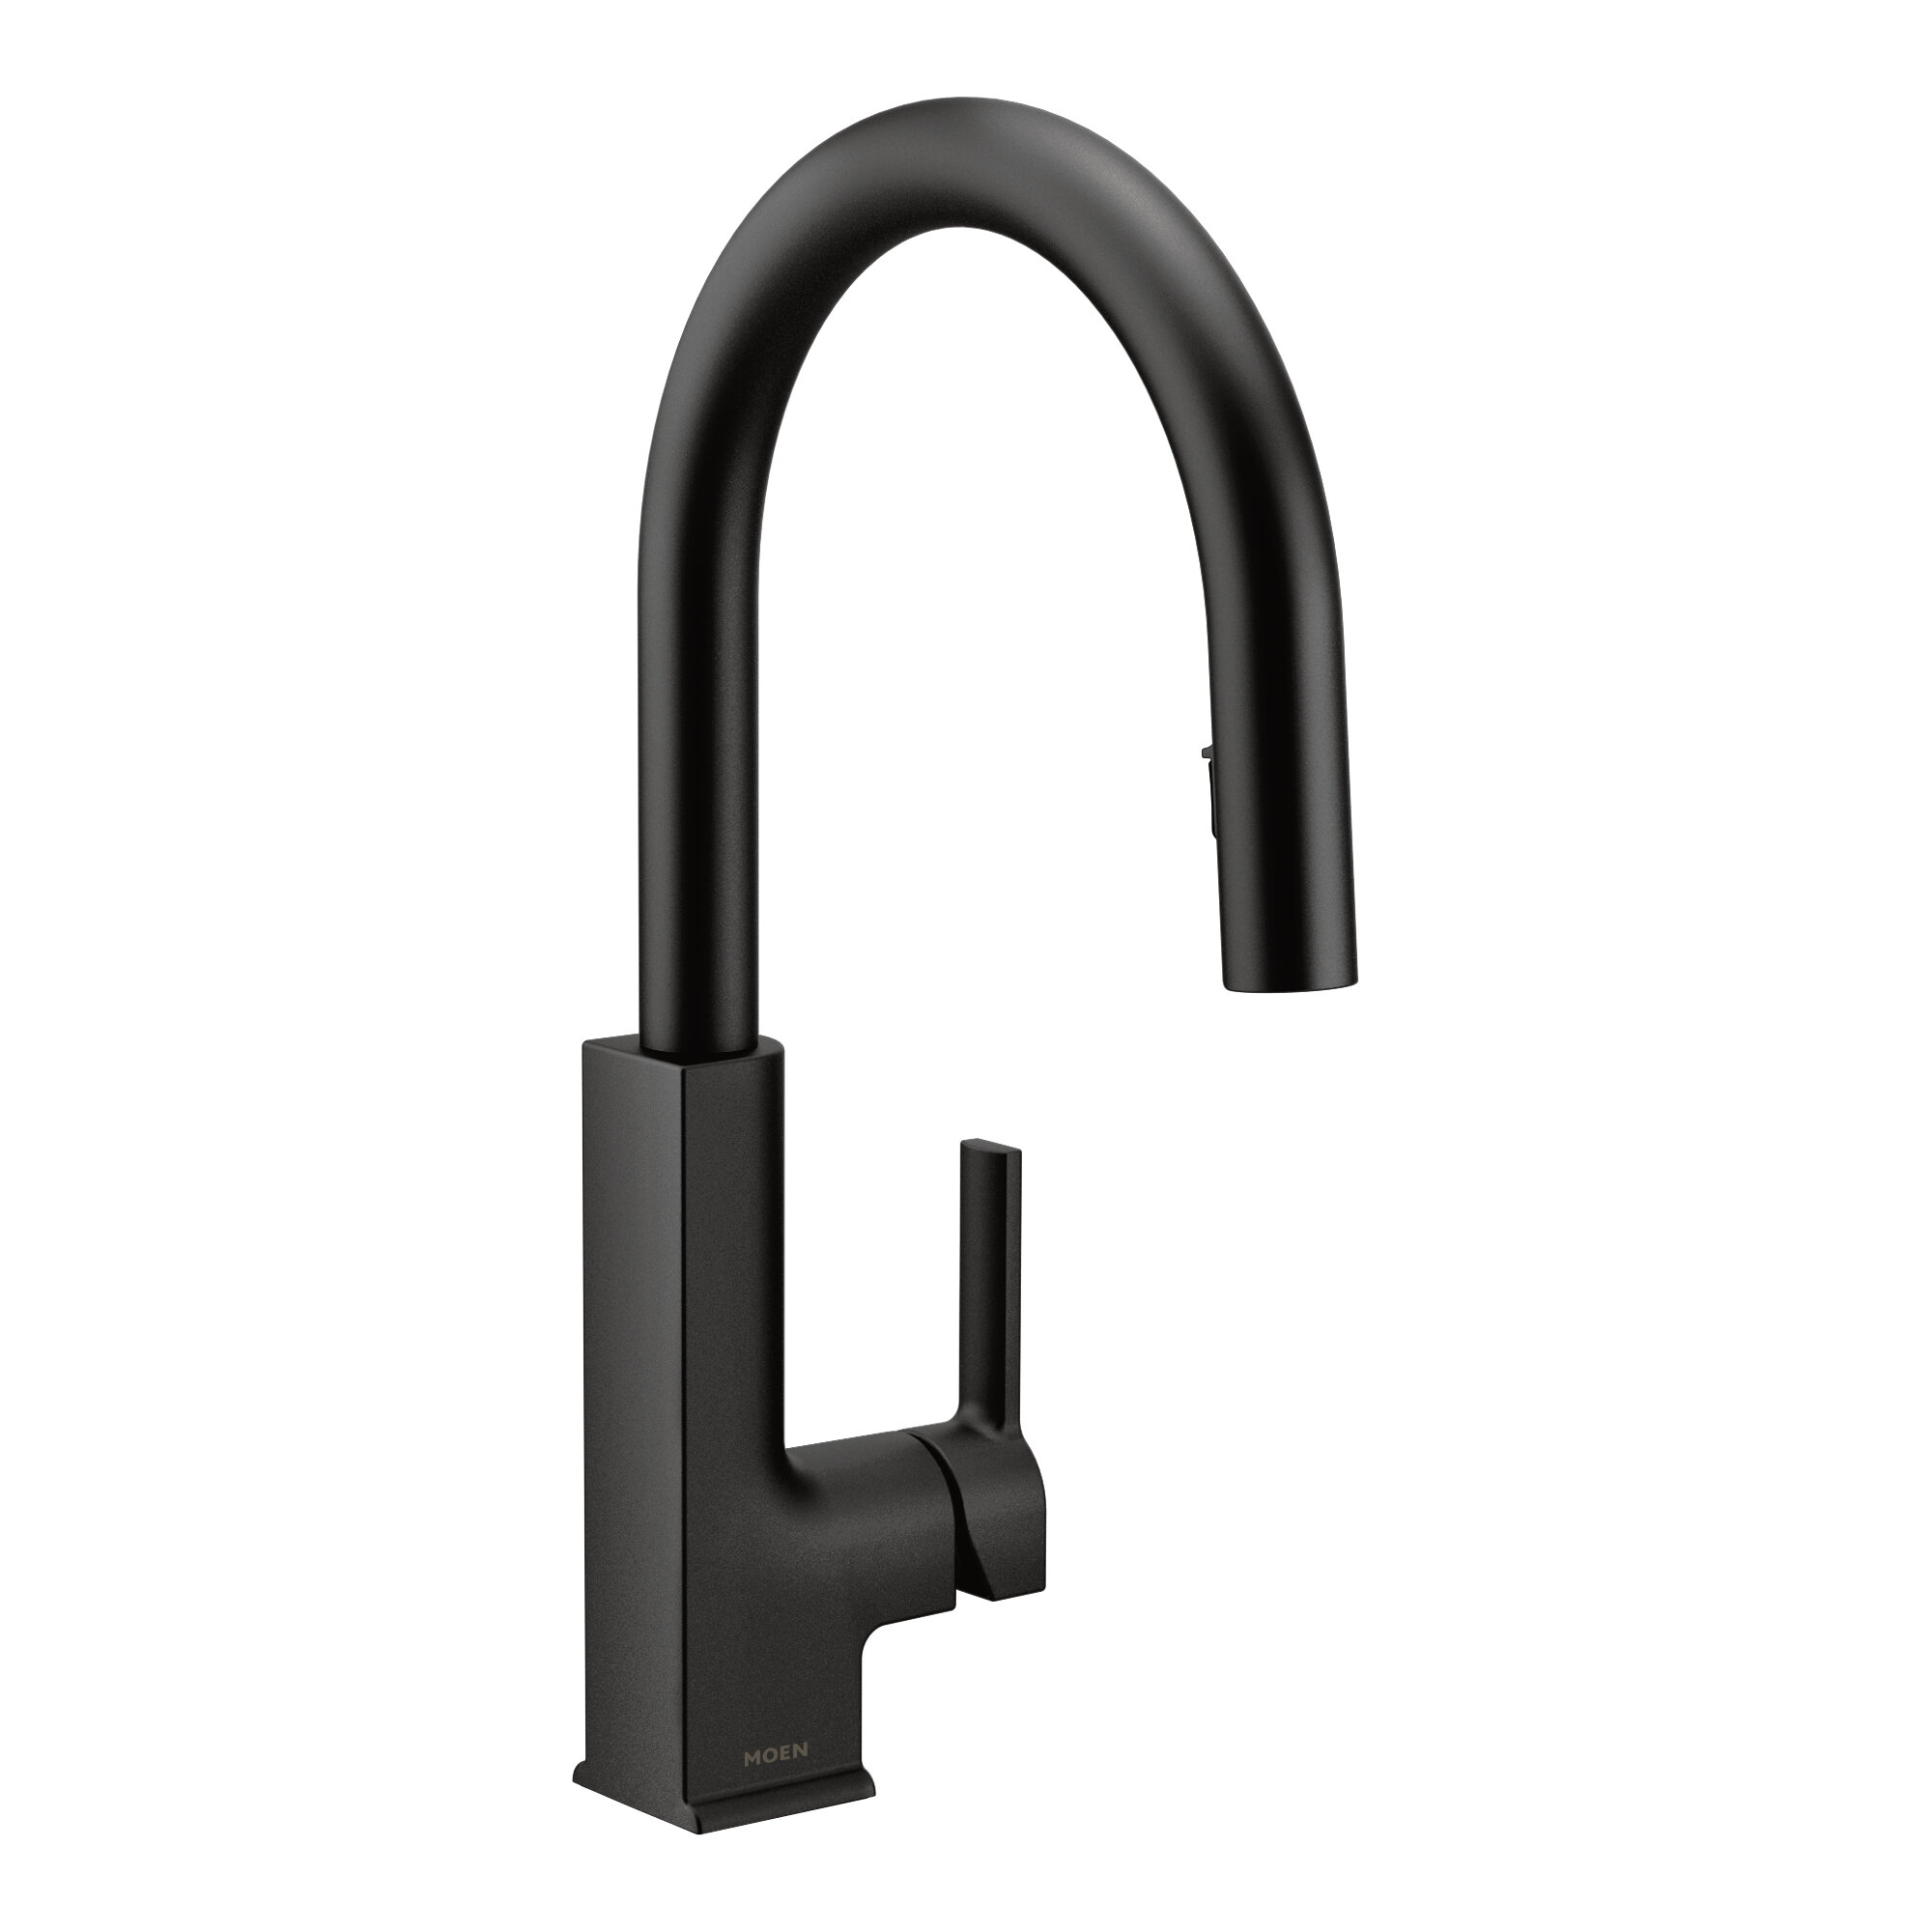 Sto Pull Down Single Handle Kitchen Faucet Reviews Allmodern